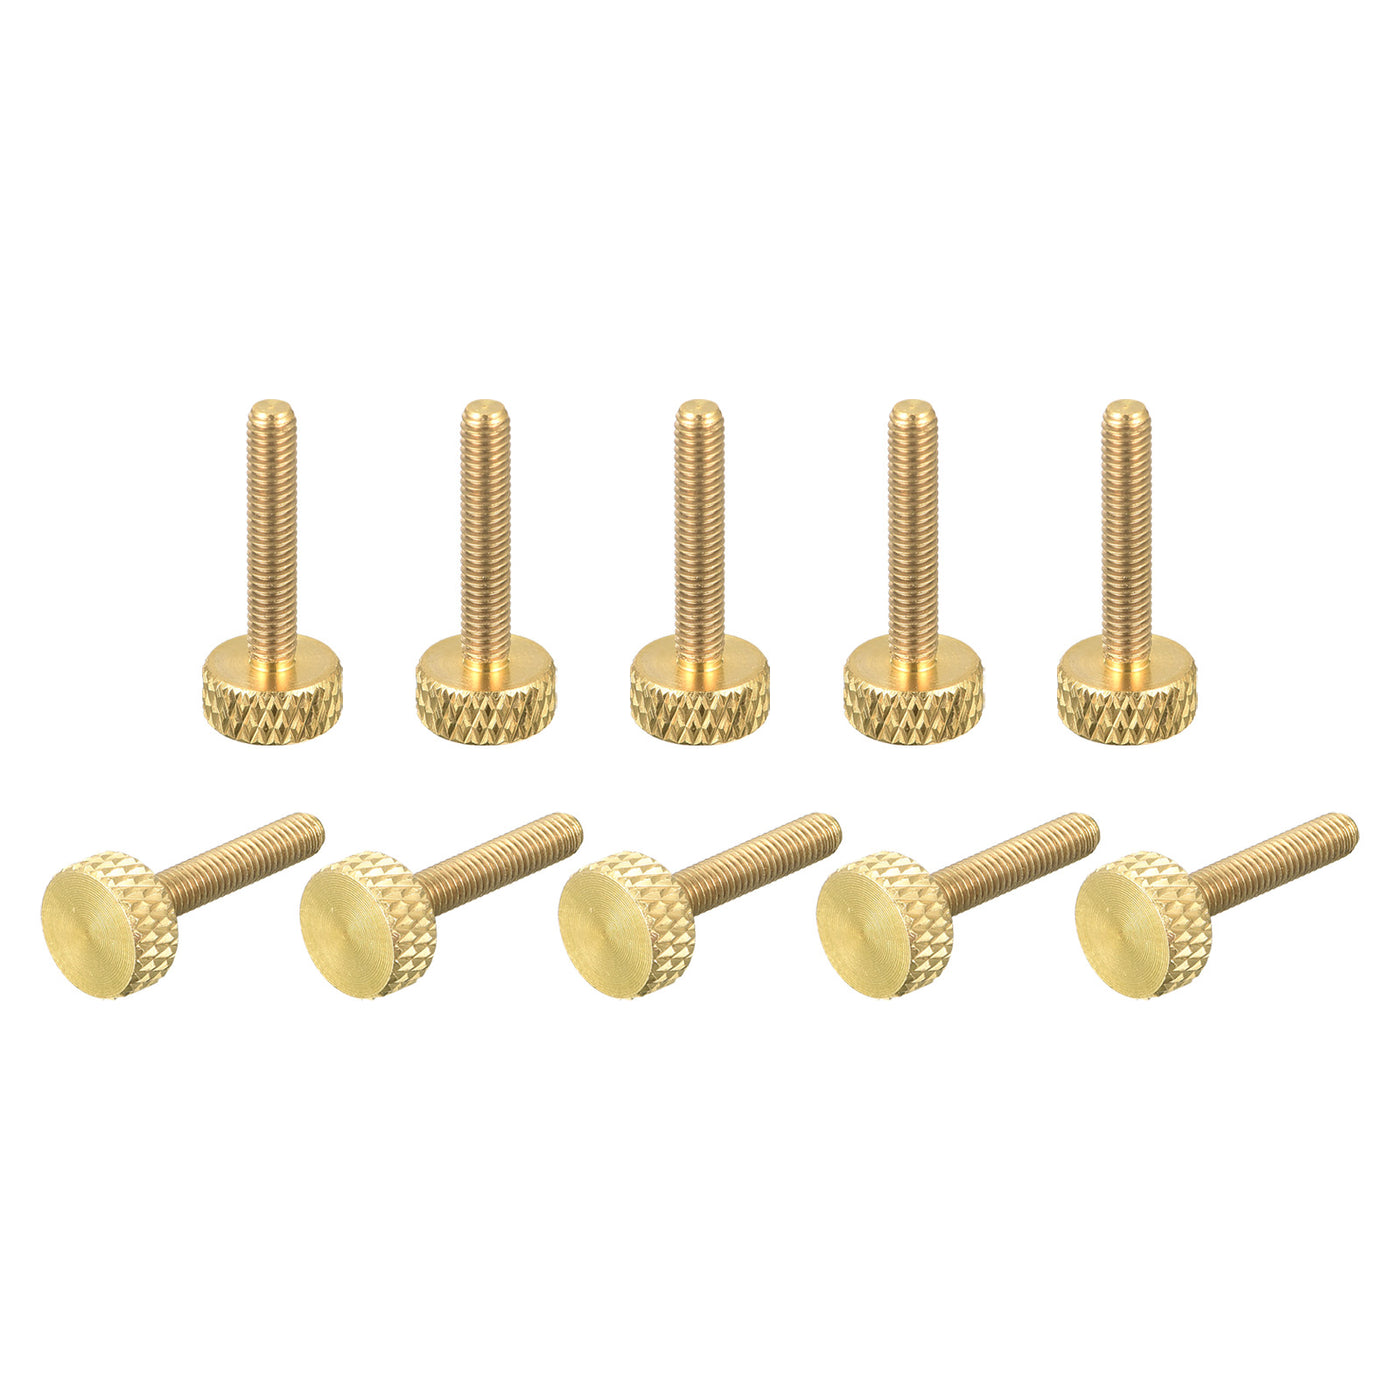 uxcell Uxcell 10Pcs Brass Knurled Thumb Screws, M3x16mm  Flat Grip Bolt Knobs Fasteners for Electronic, Mechanical